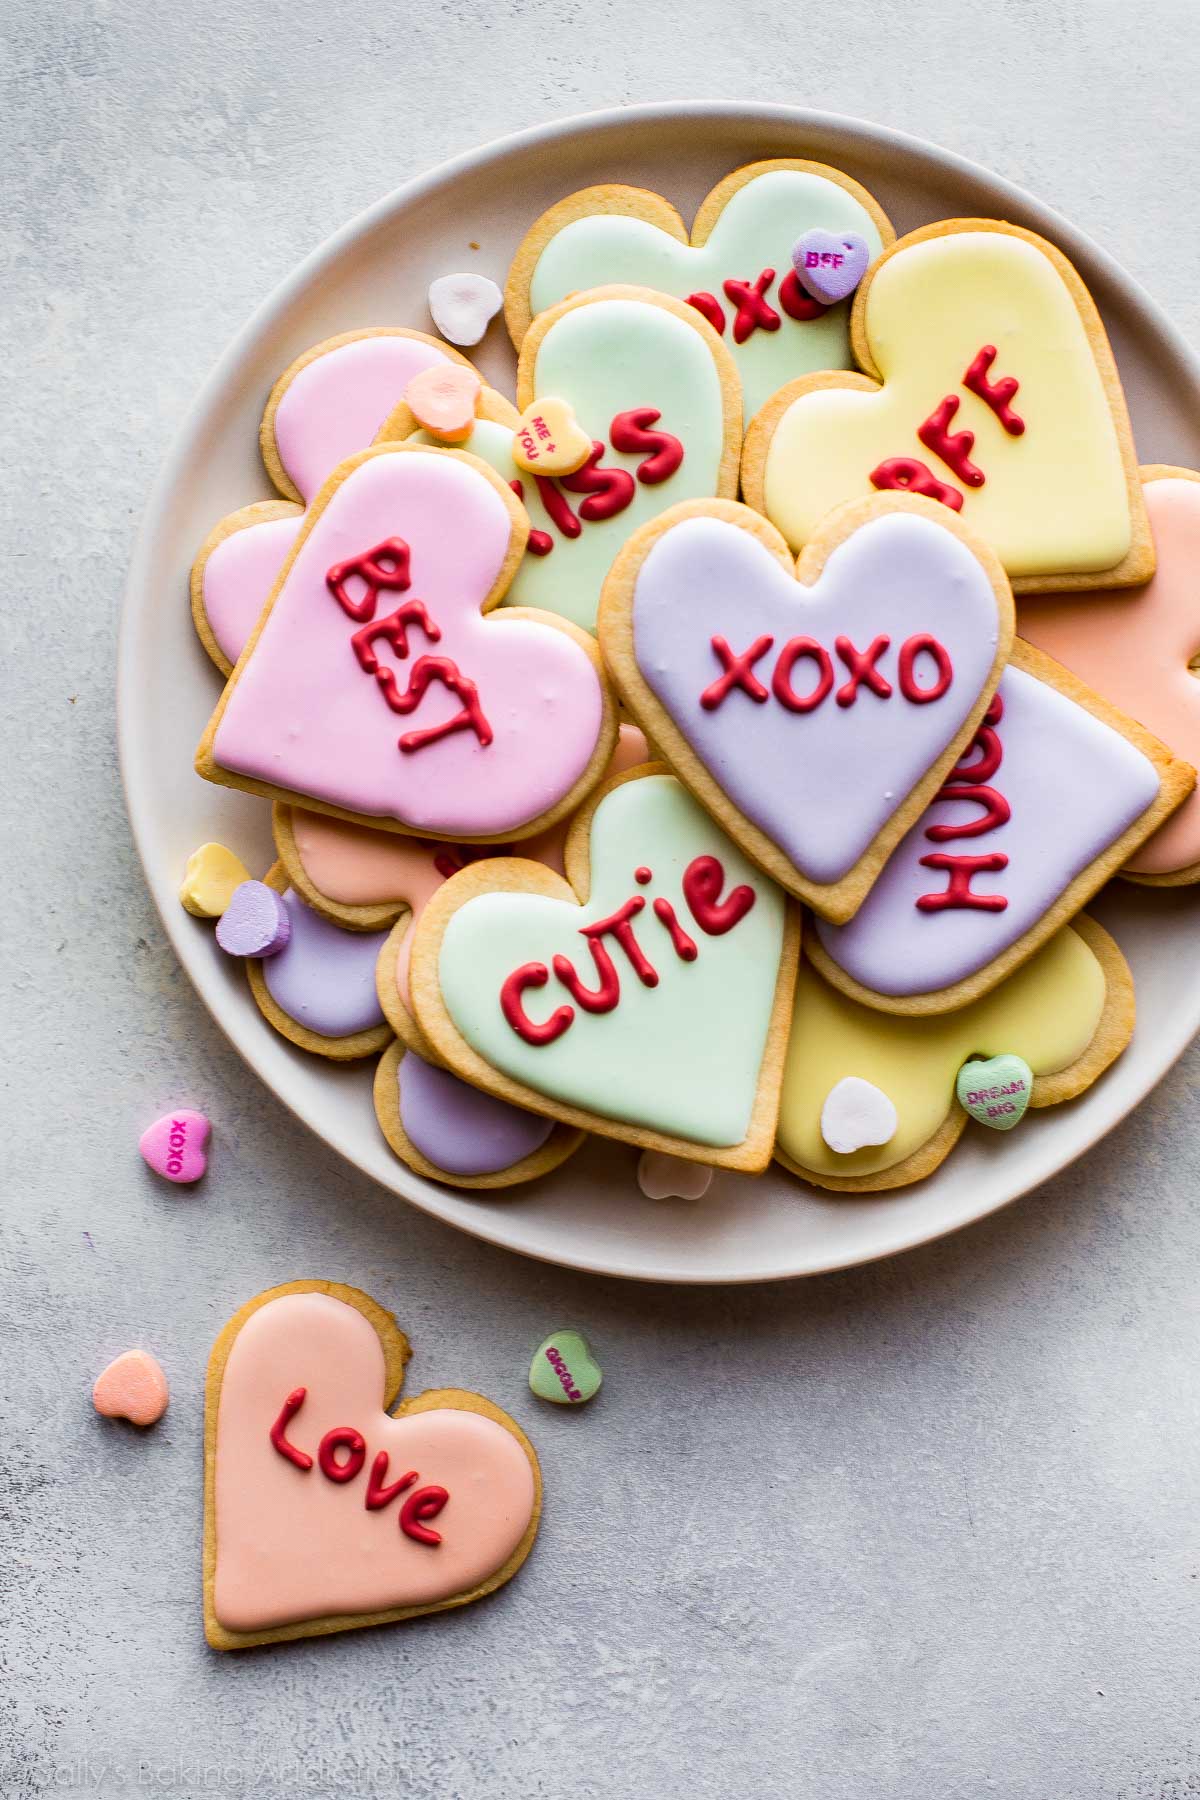 conversation heart sugar cookies decorated with colorful royal icing on a white plate